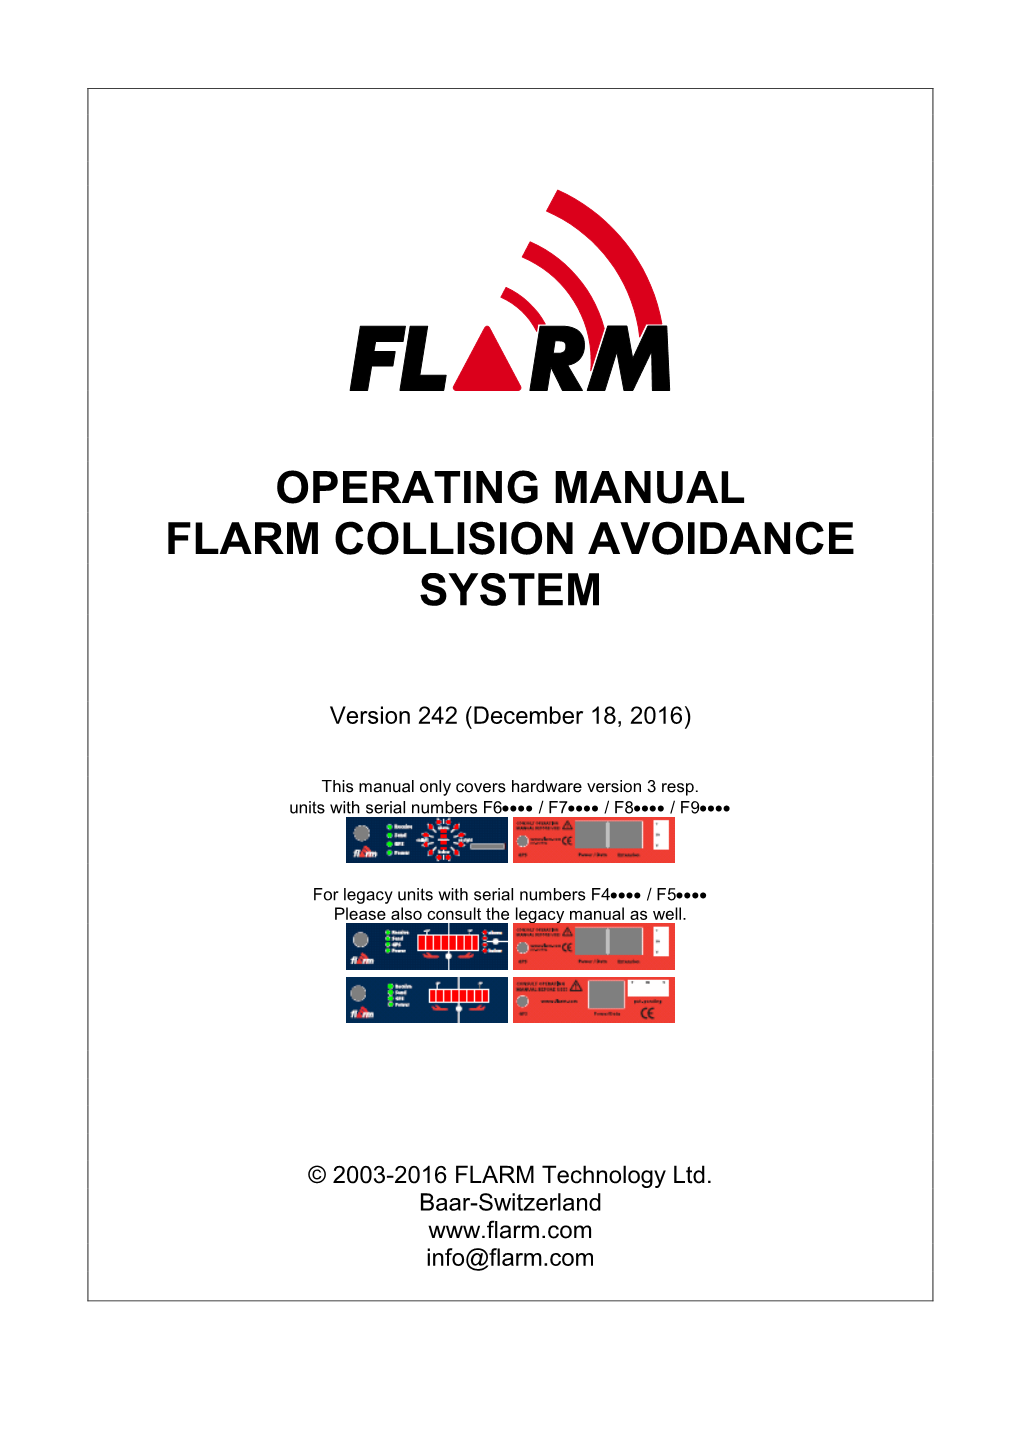 Operating Manual Flarm Collision Avoidance System